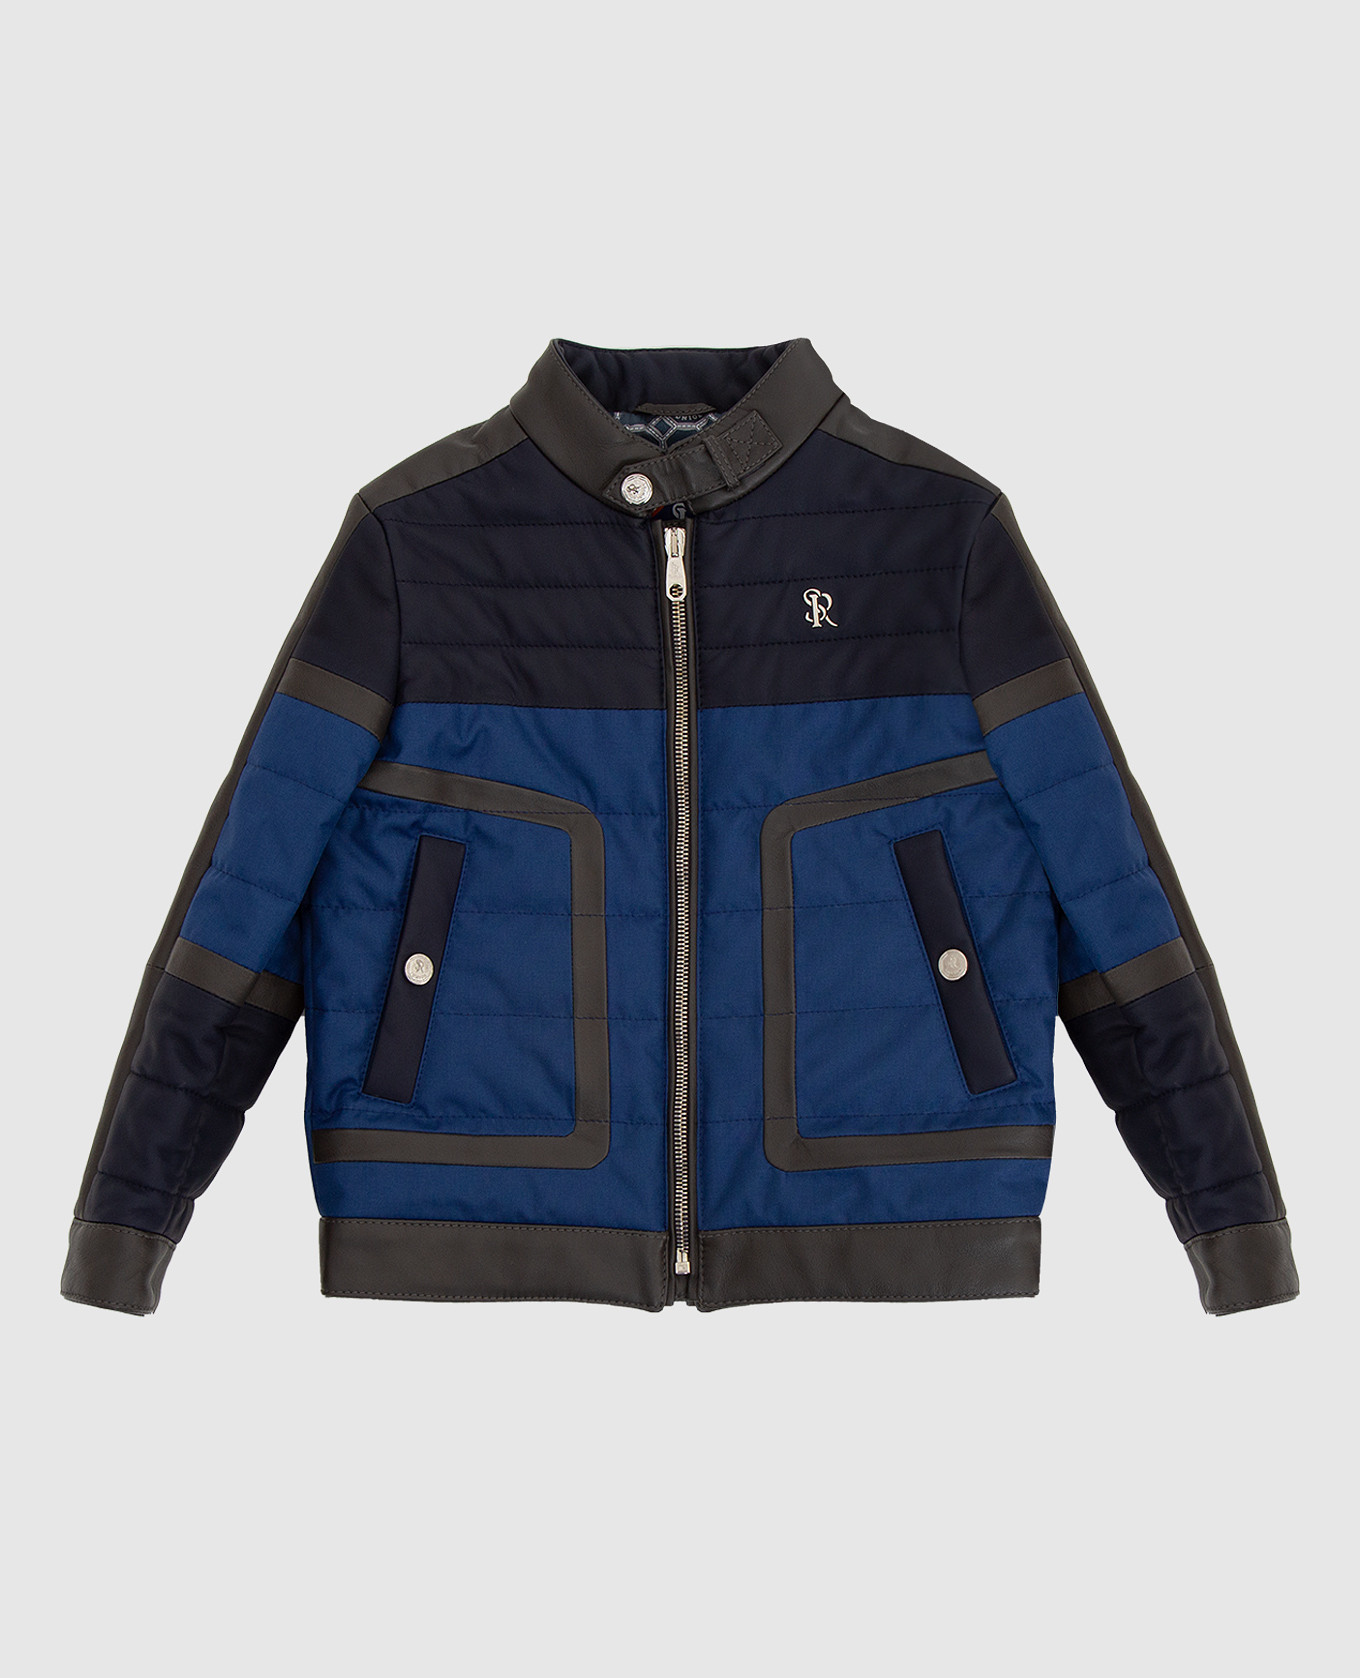 Children's blue jacket with leather inserts